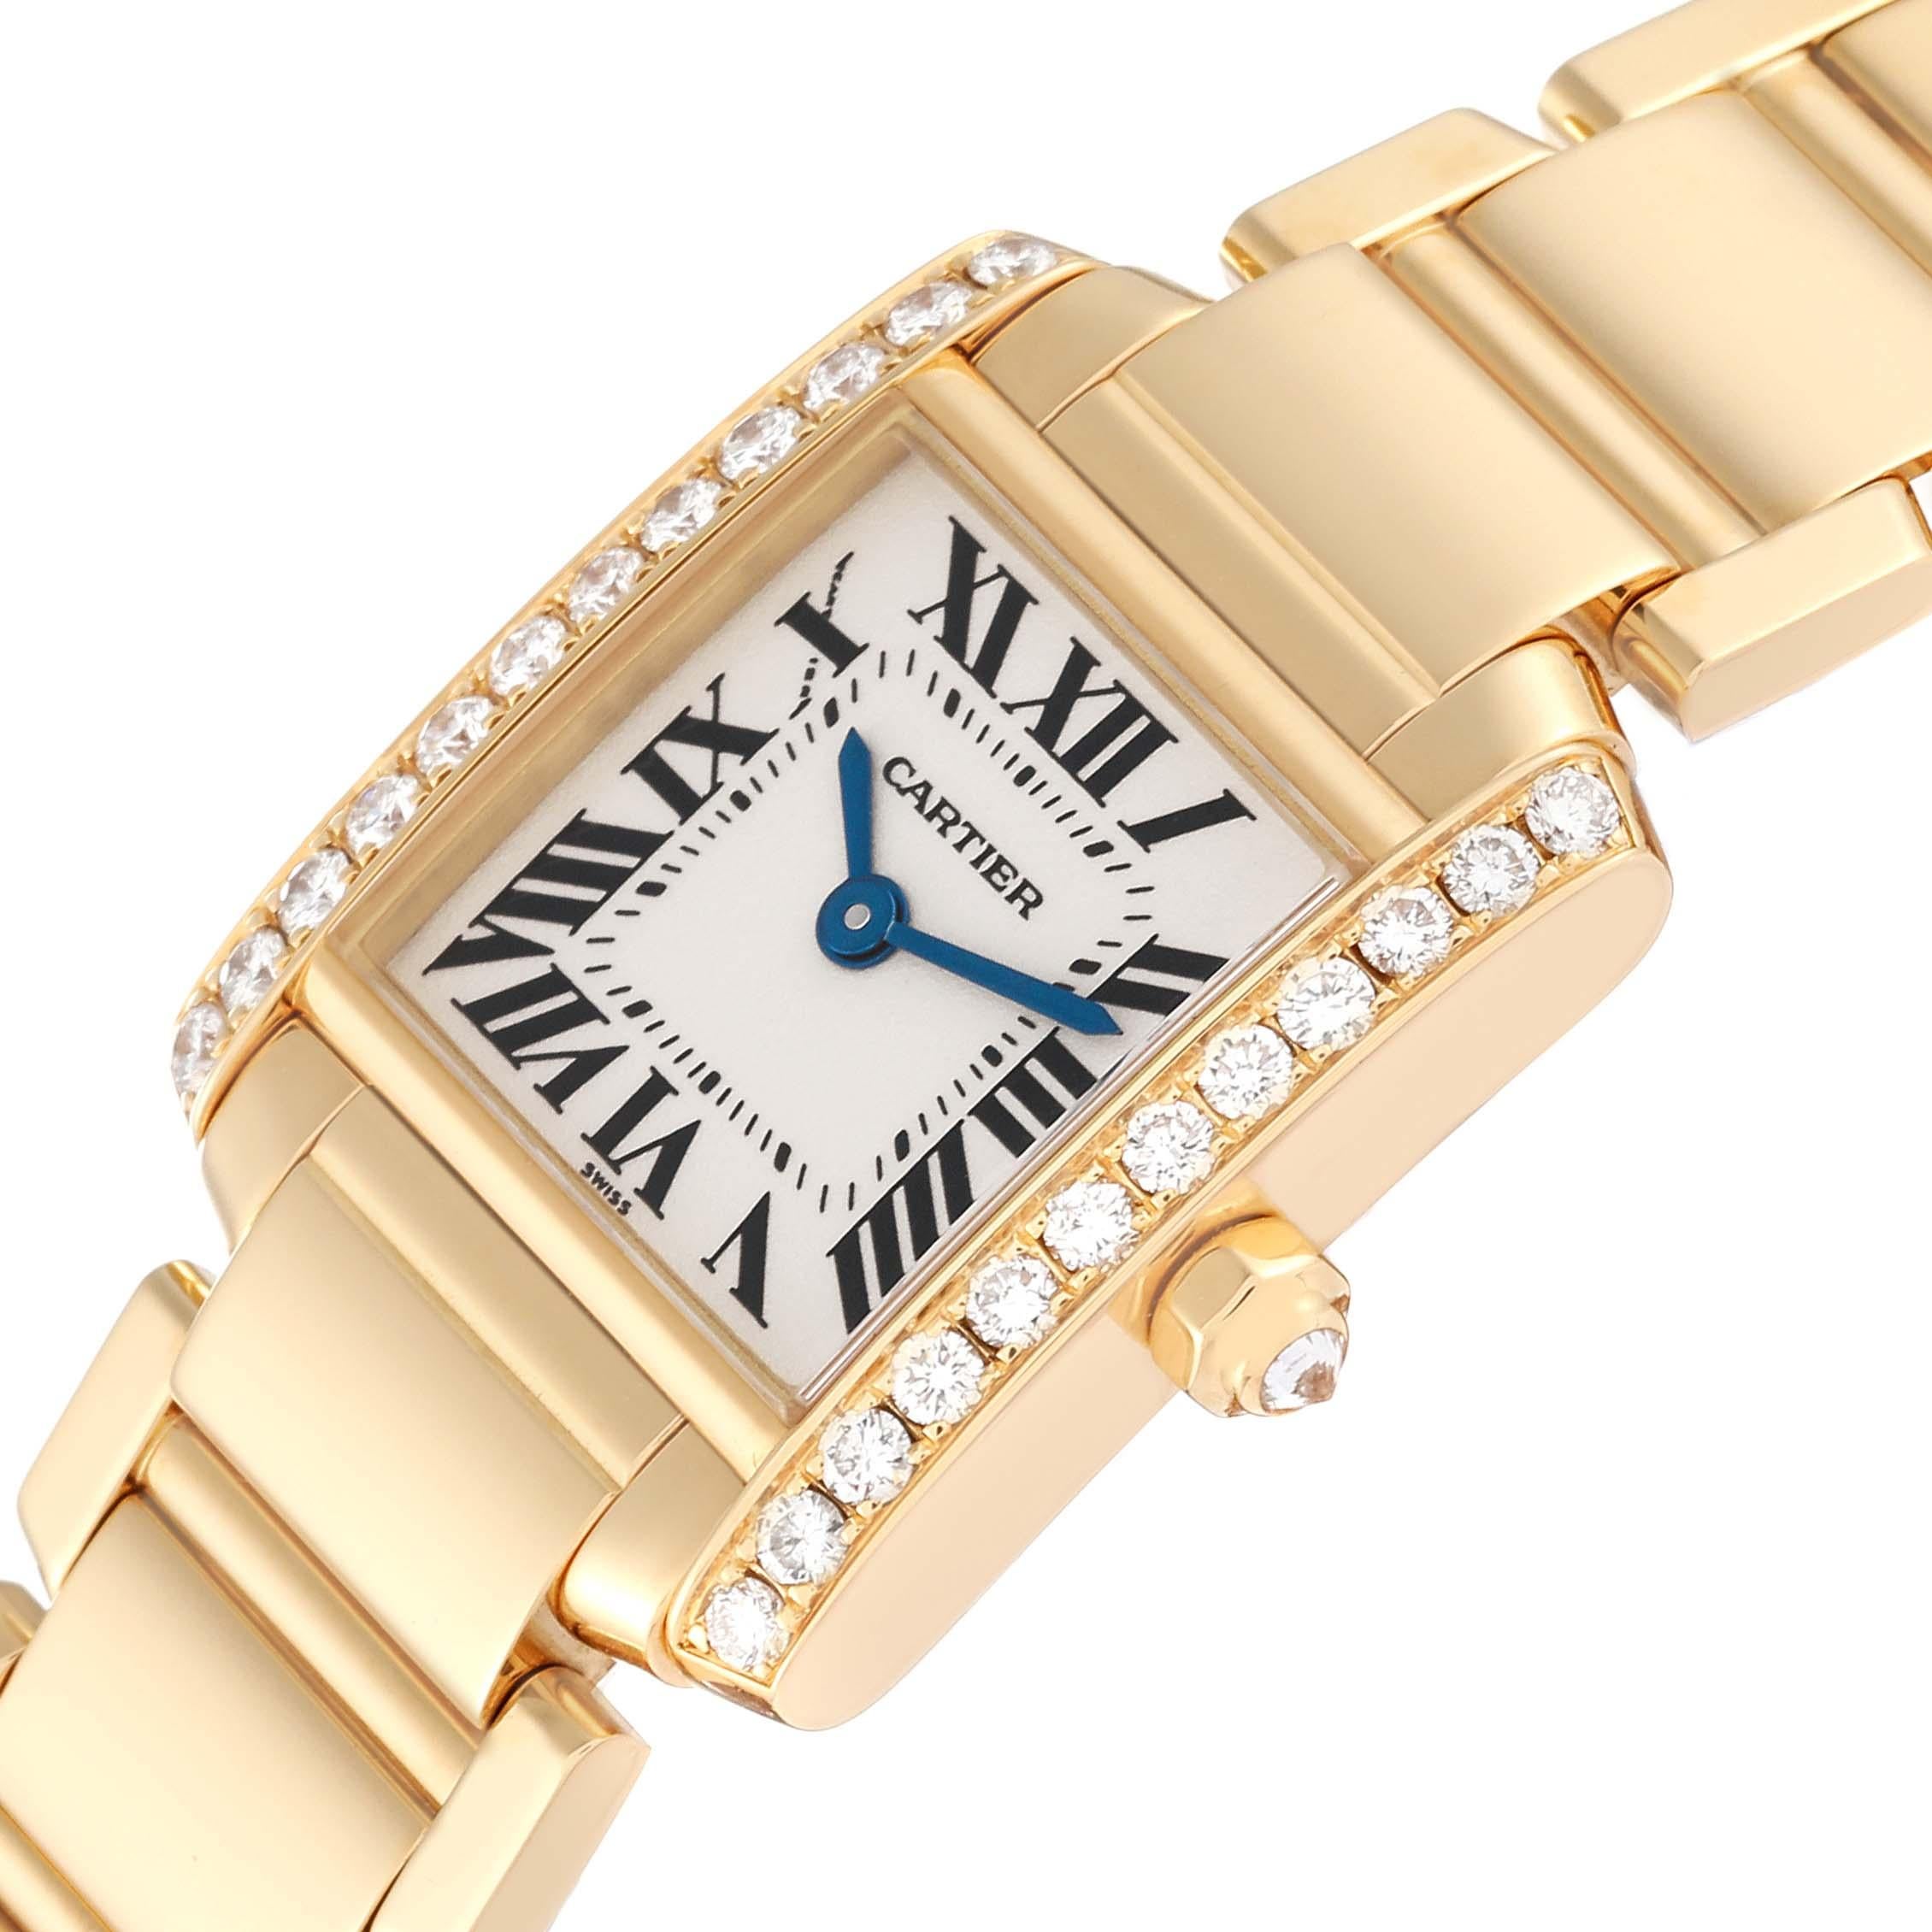 Cartier Tank Francaise Yellow Gold Diamond Ladies Watch WE1001R8 For Sale 1